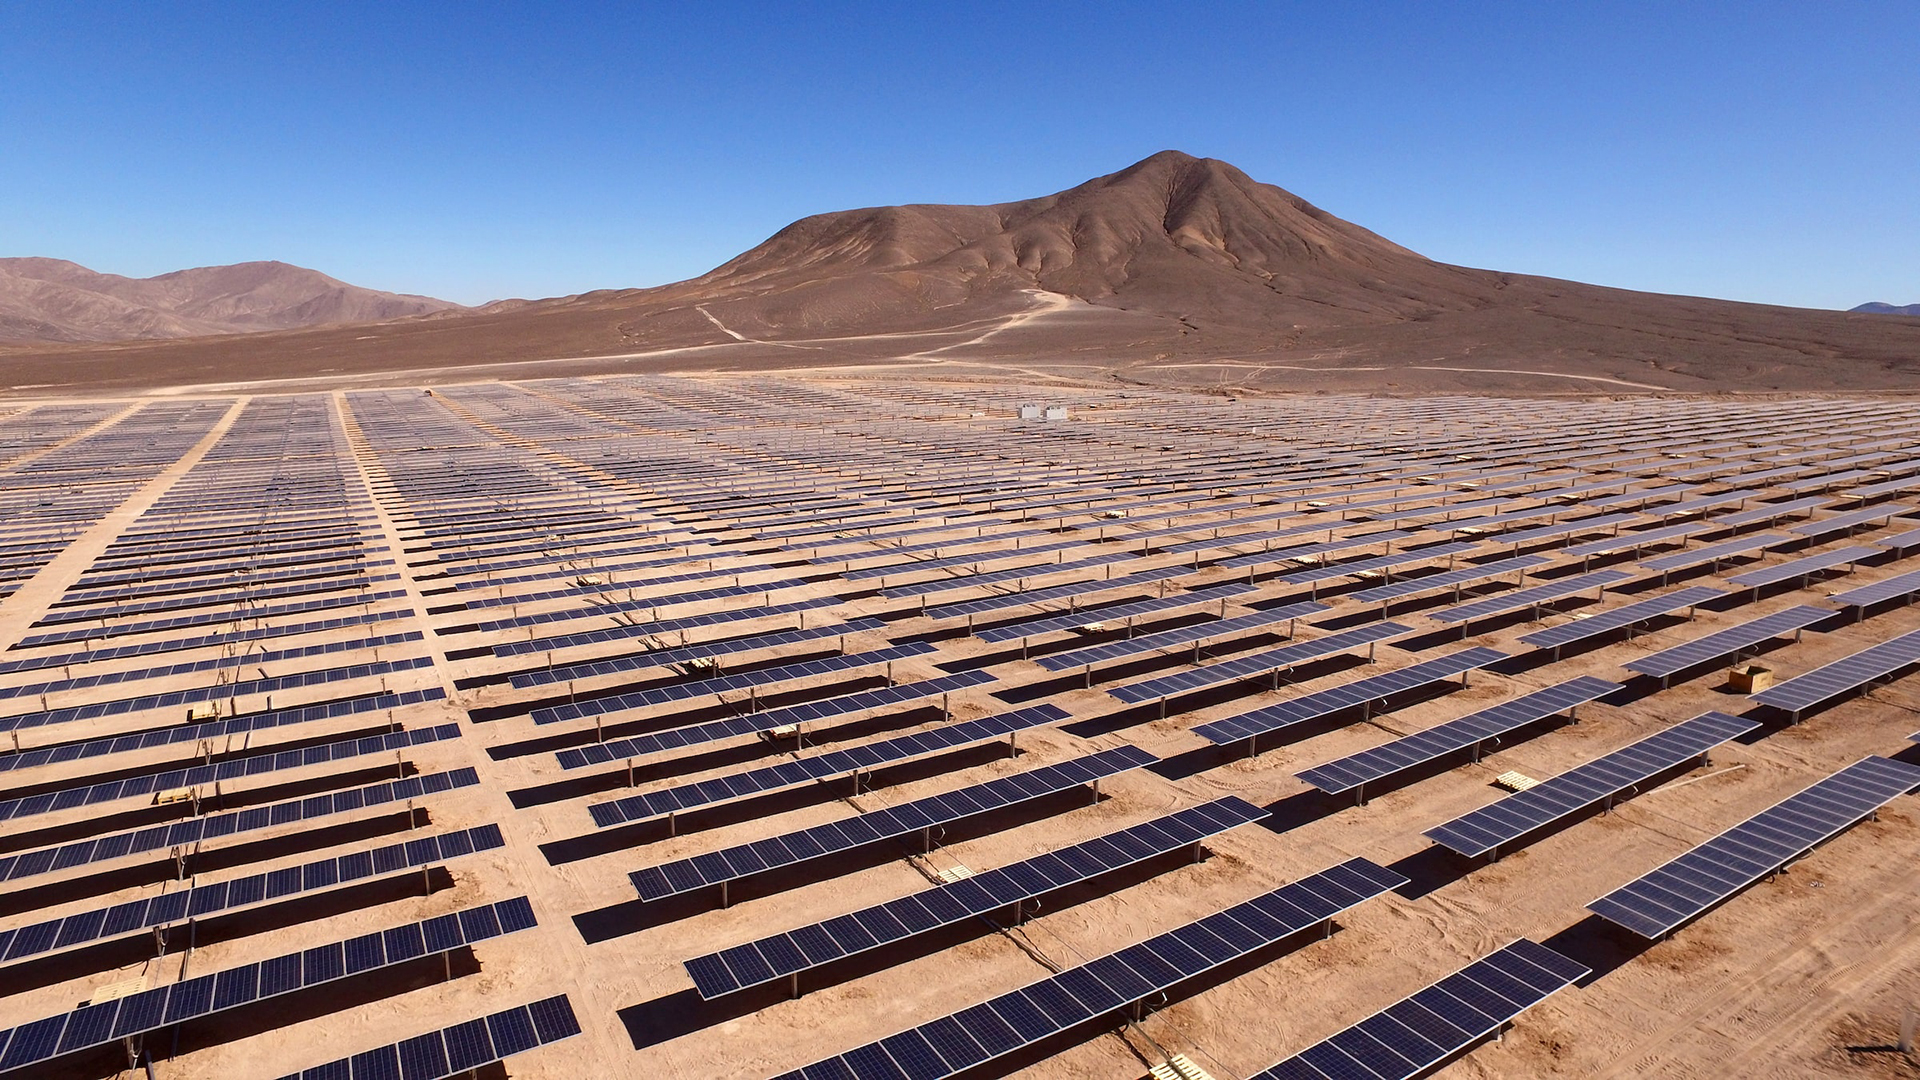 An expansive field of solar panels in the desert with a mountain in the background.